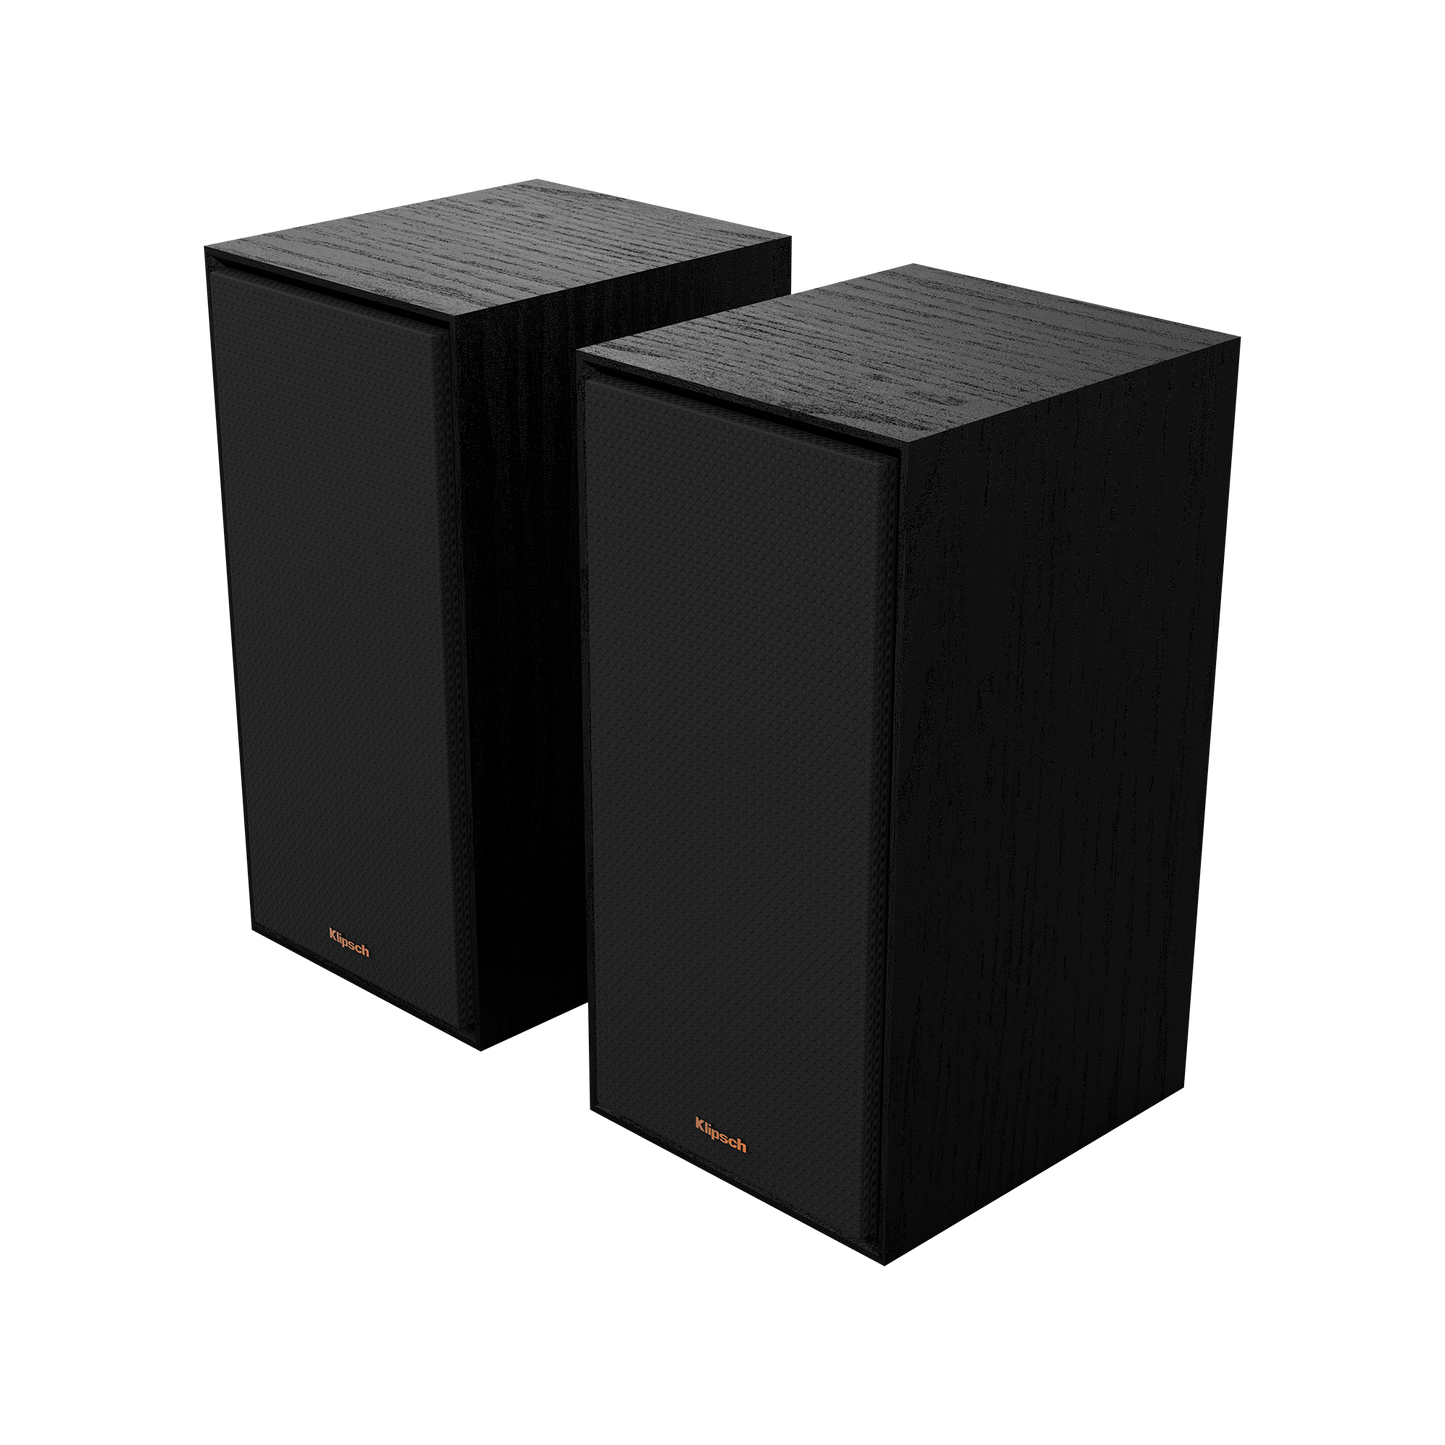 Klipsch R-50PM Powered Speakers with 5.25" Woofers. Black with grille